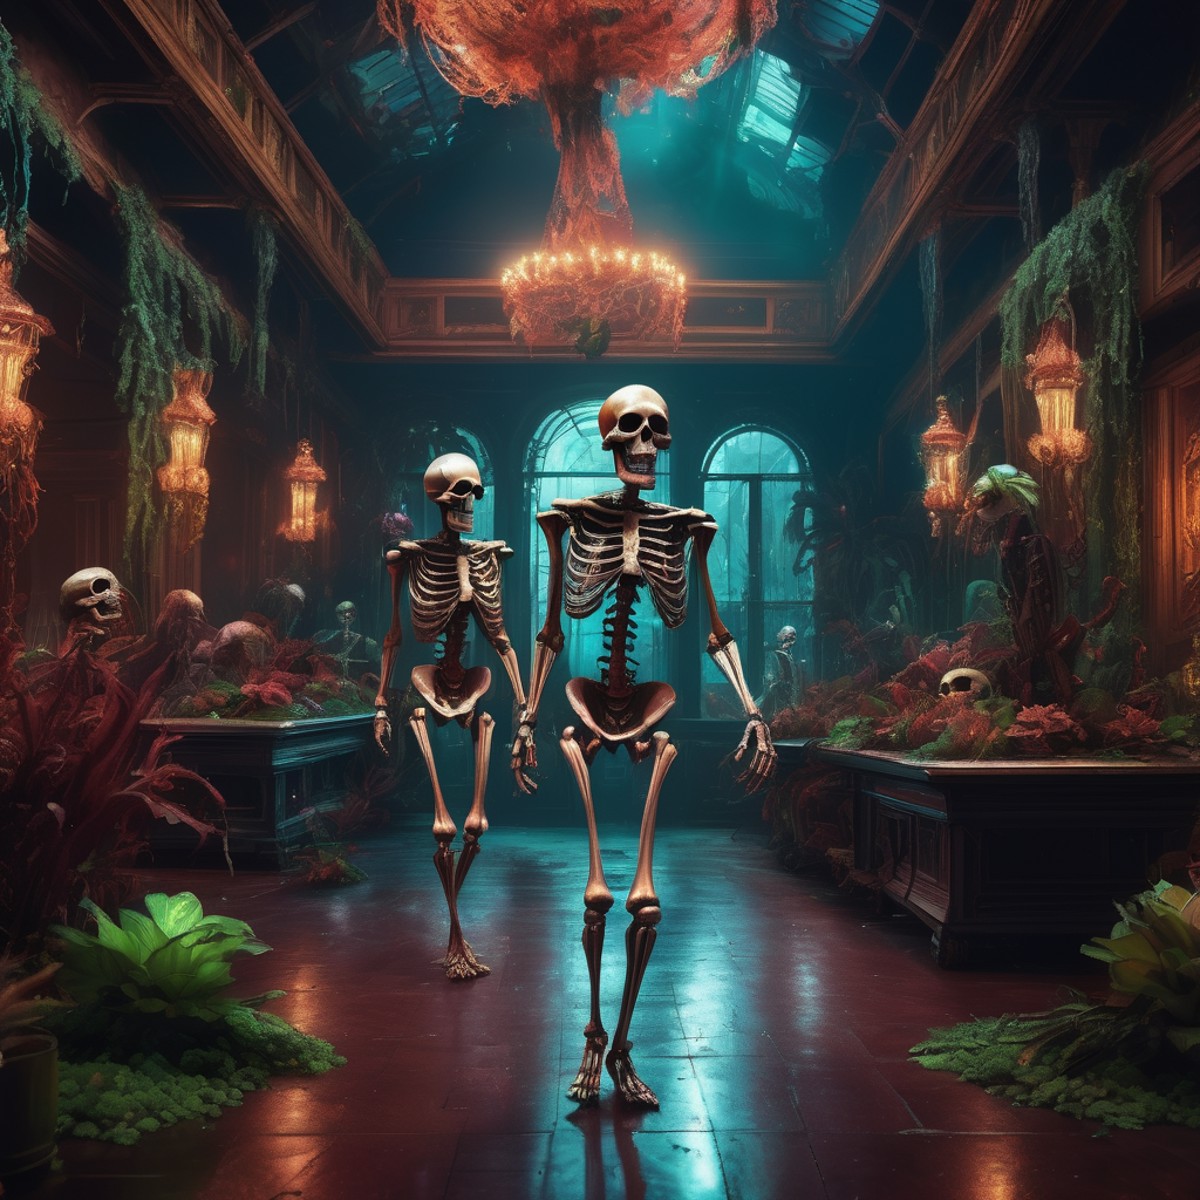 A grand ballroom scene with skeletons adorned in rusted royal attires dancing among carnivorous plants and android guests....